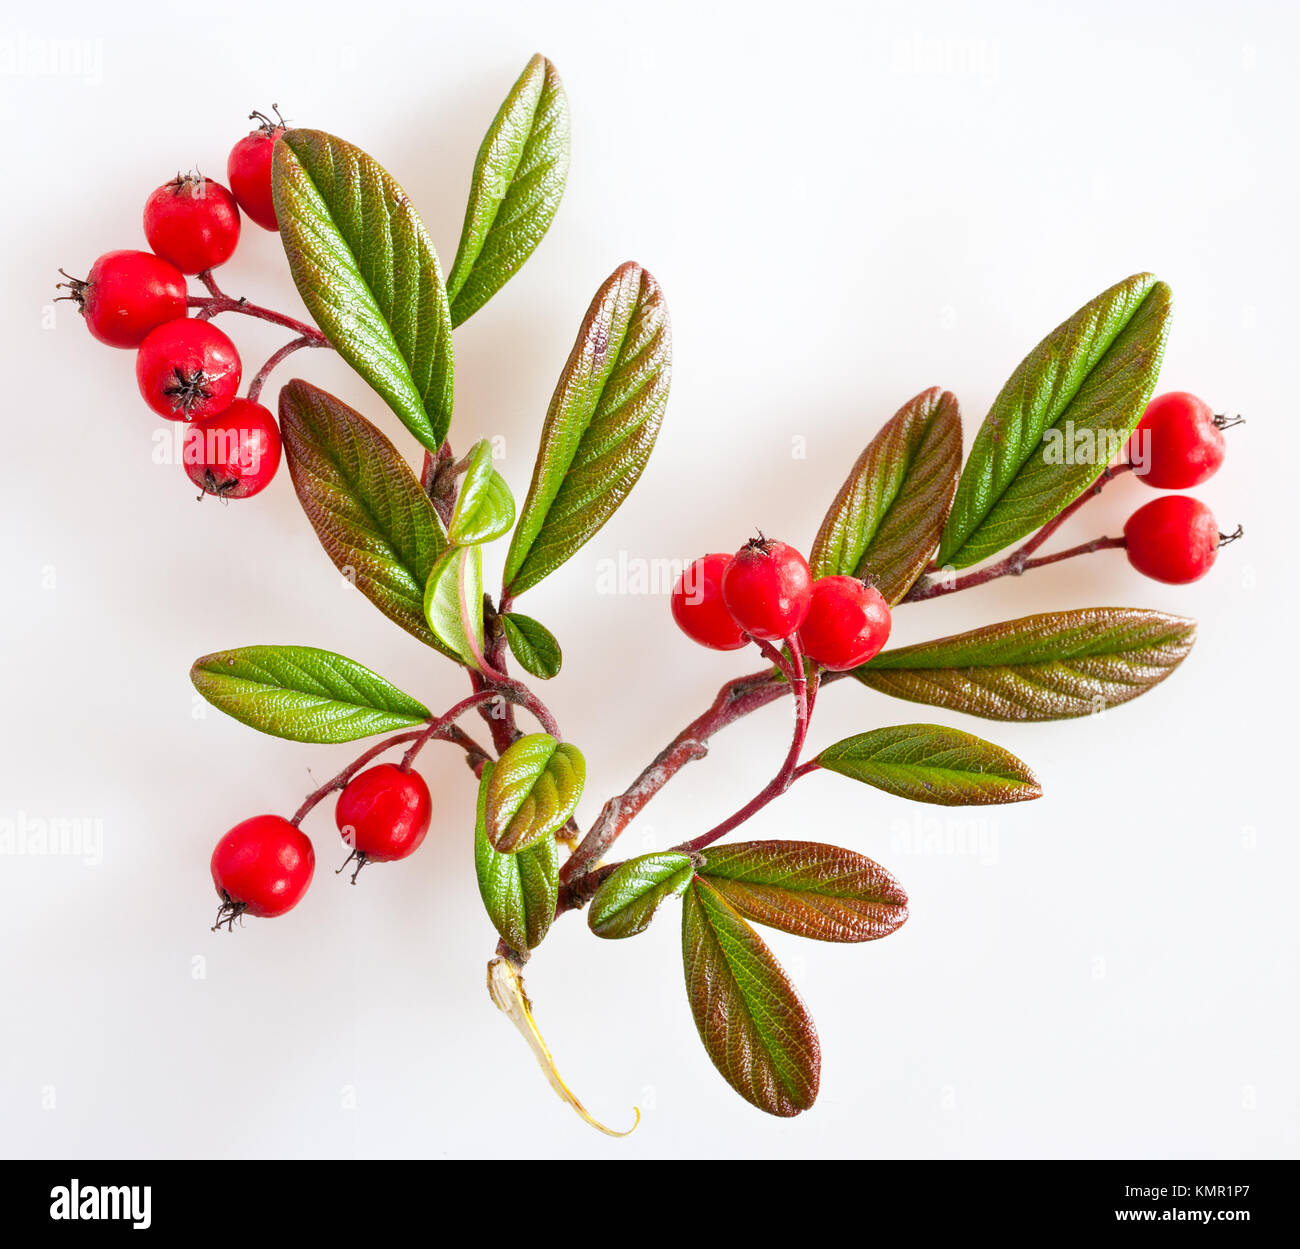 cotoneaster with ripe red berries / Cotoneaster lacteus / skalník Stock Photo